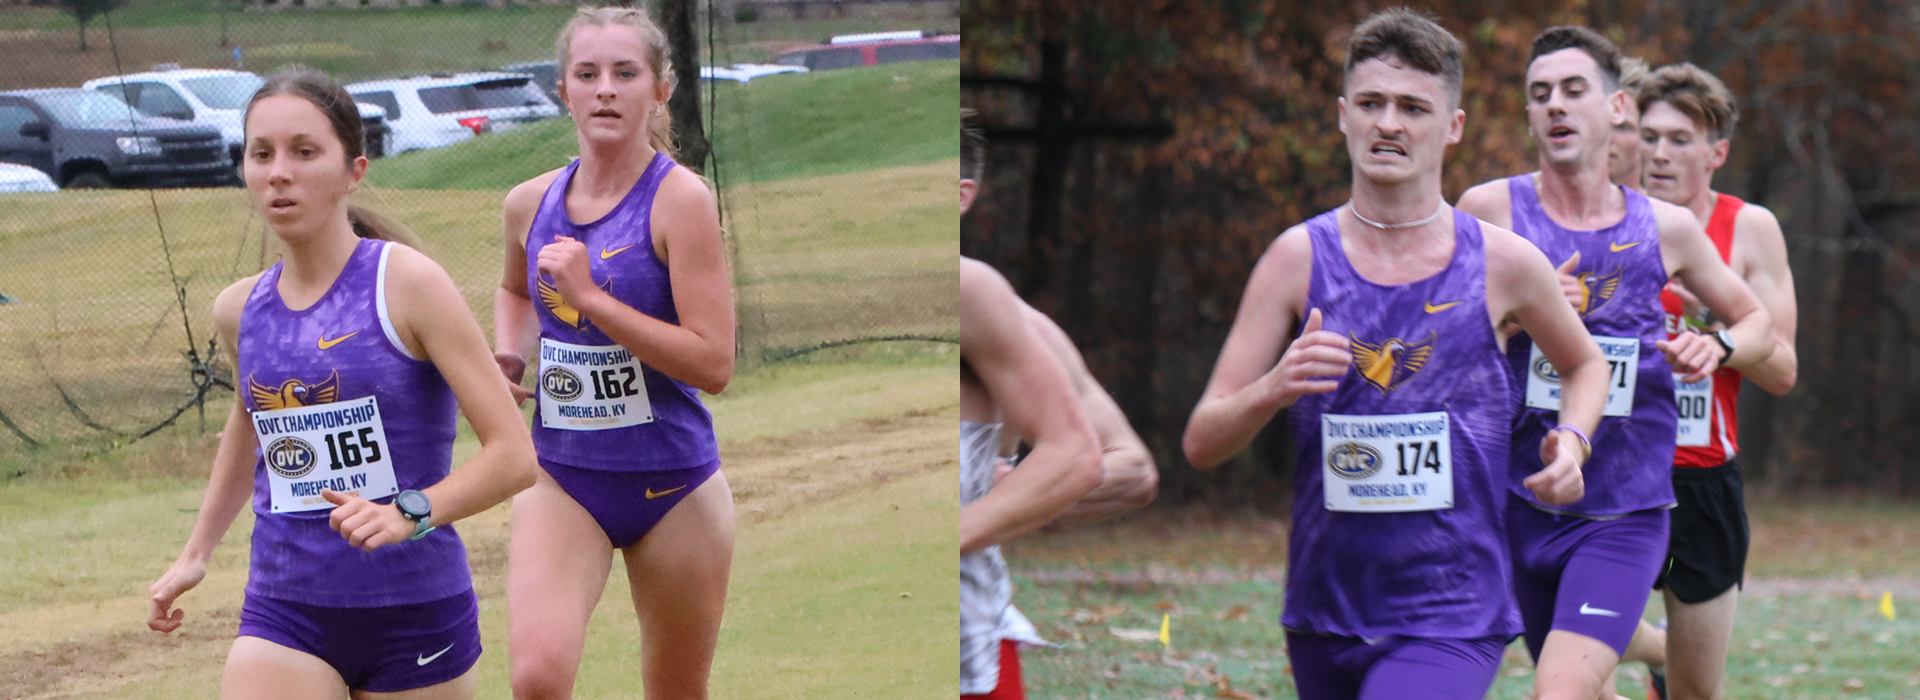 Purple and gold well represented at NCAA South Regional Championships